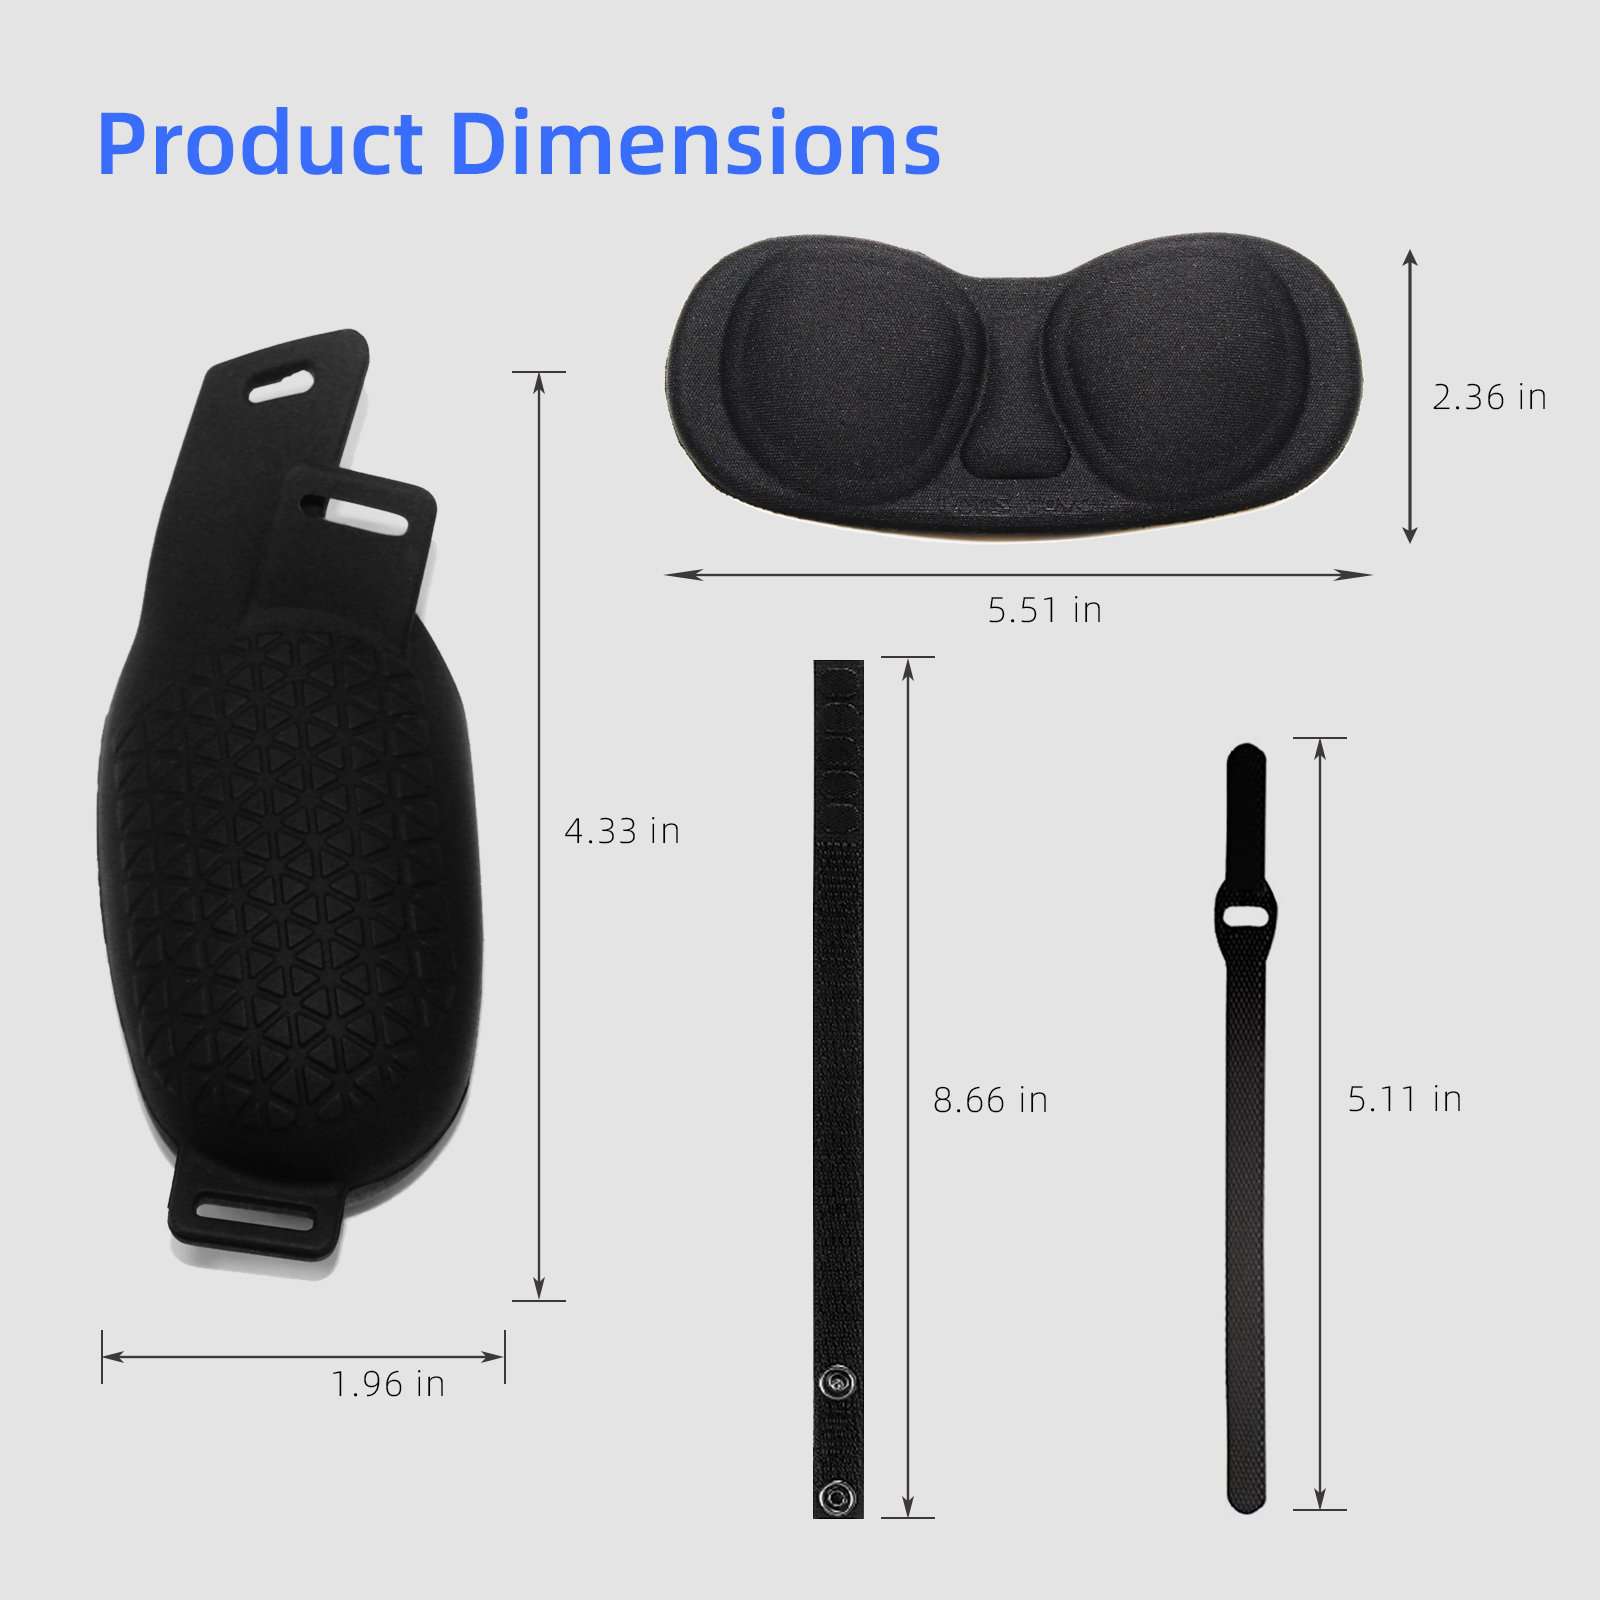 The VR silicone cover is 4.33'' long and 1.96'' wide, while the VR eye mask is 5.51'' long and 2.36'' wide.